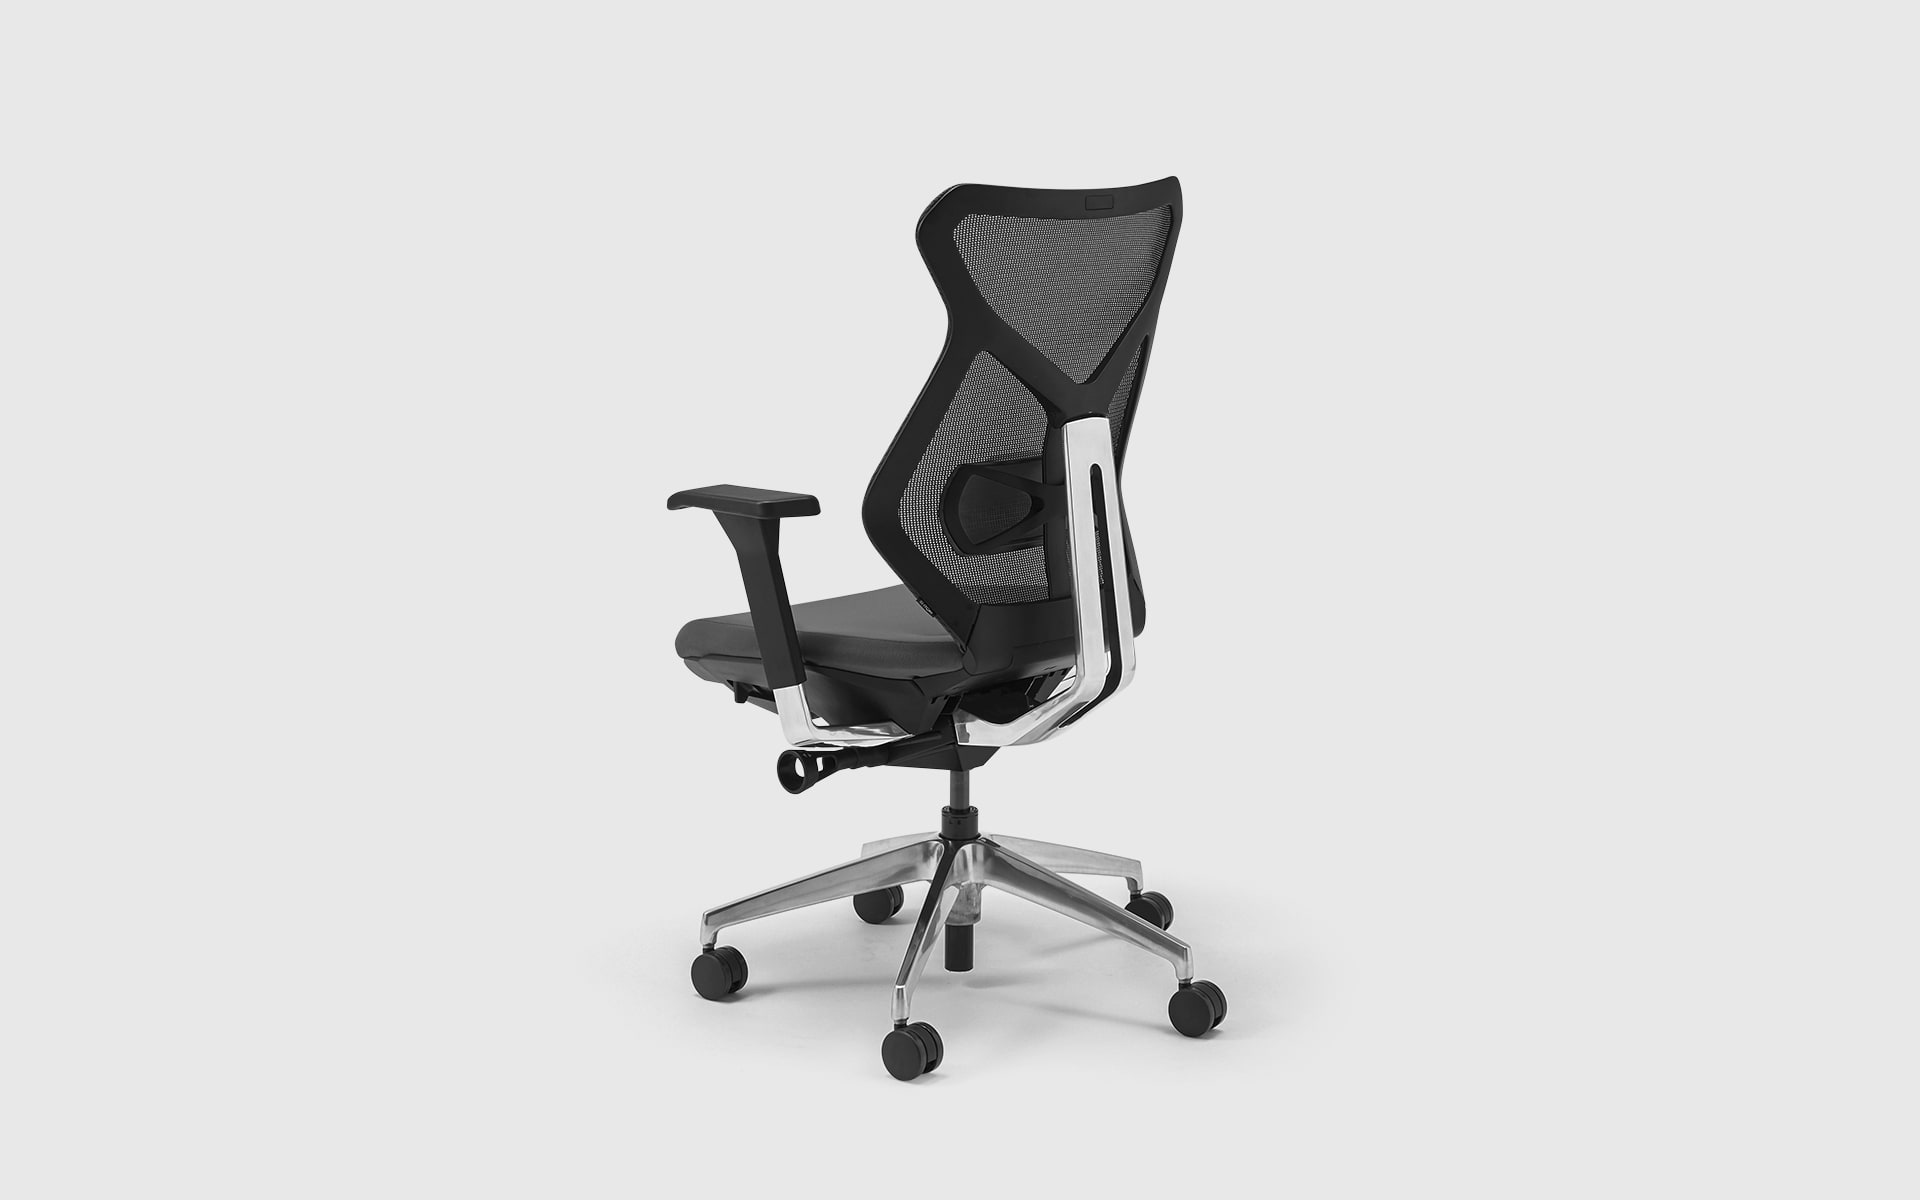 Black-and-grey ITOKI Sequa office chair by ITO Design